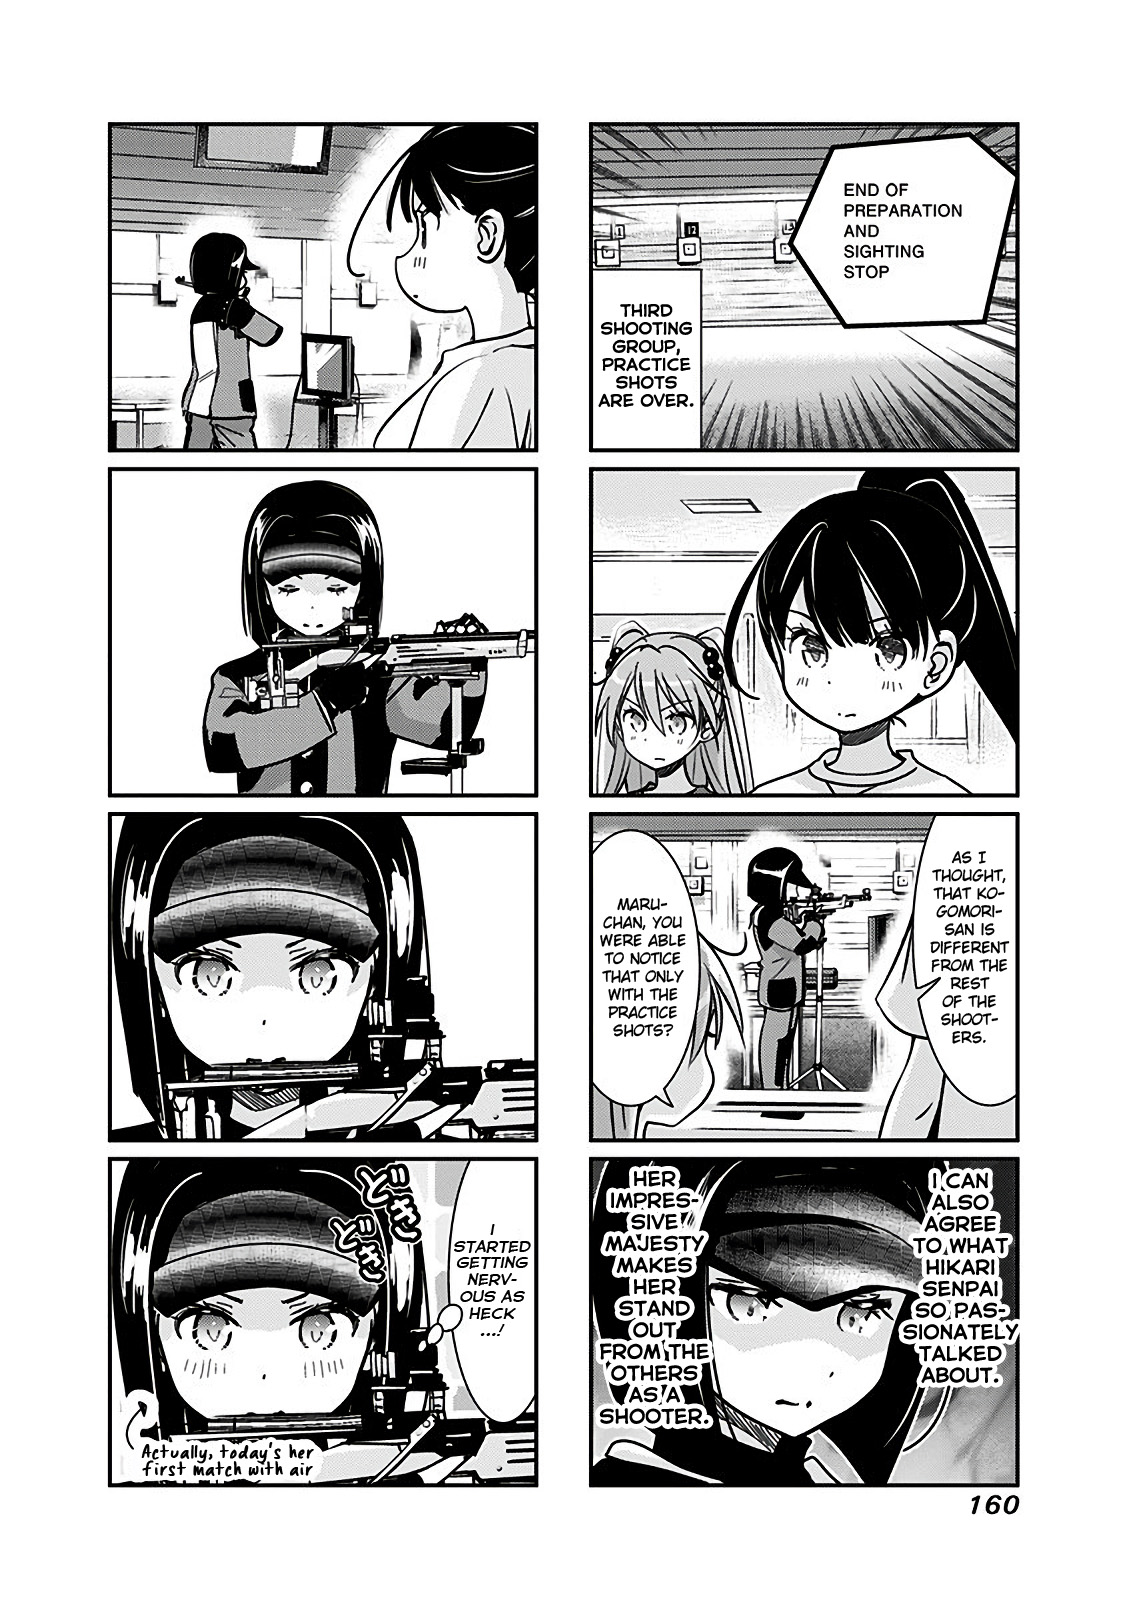 Rifle Is Beautiful Vol.6 Chapter 169: The Princess Is Watching, Prince! - Picture 2